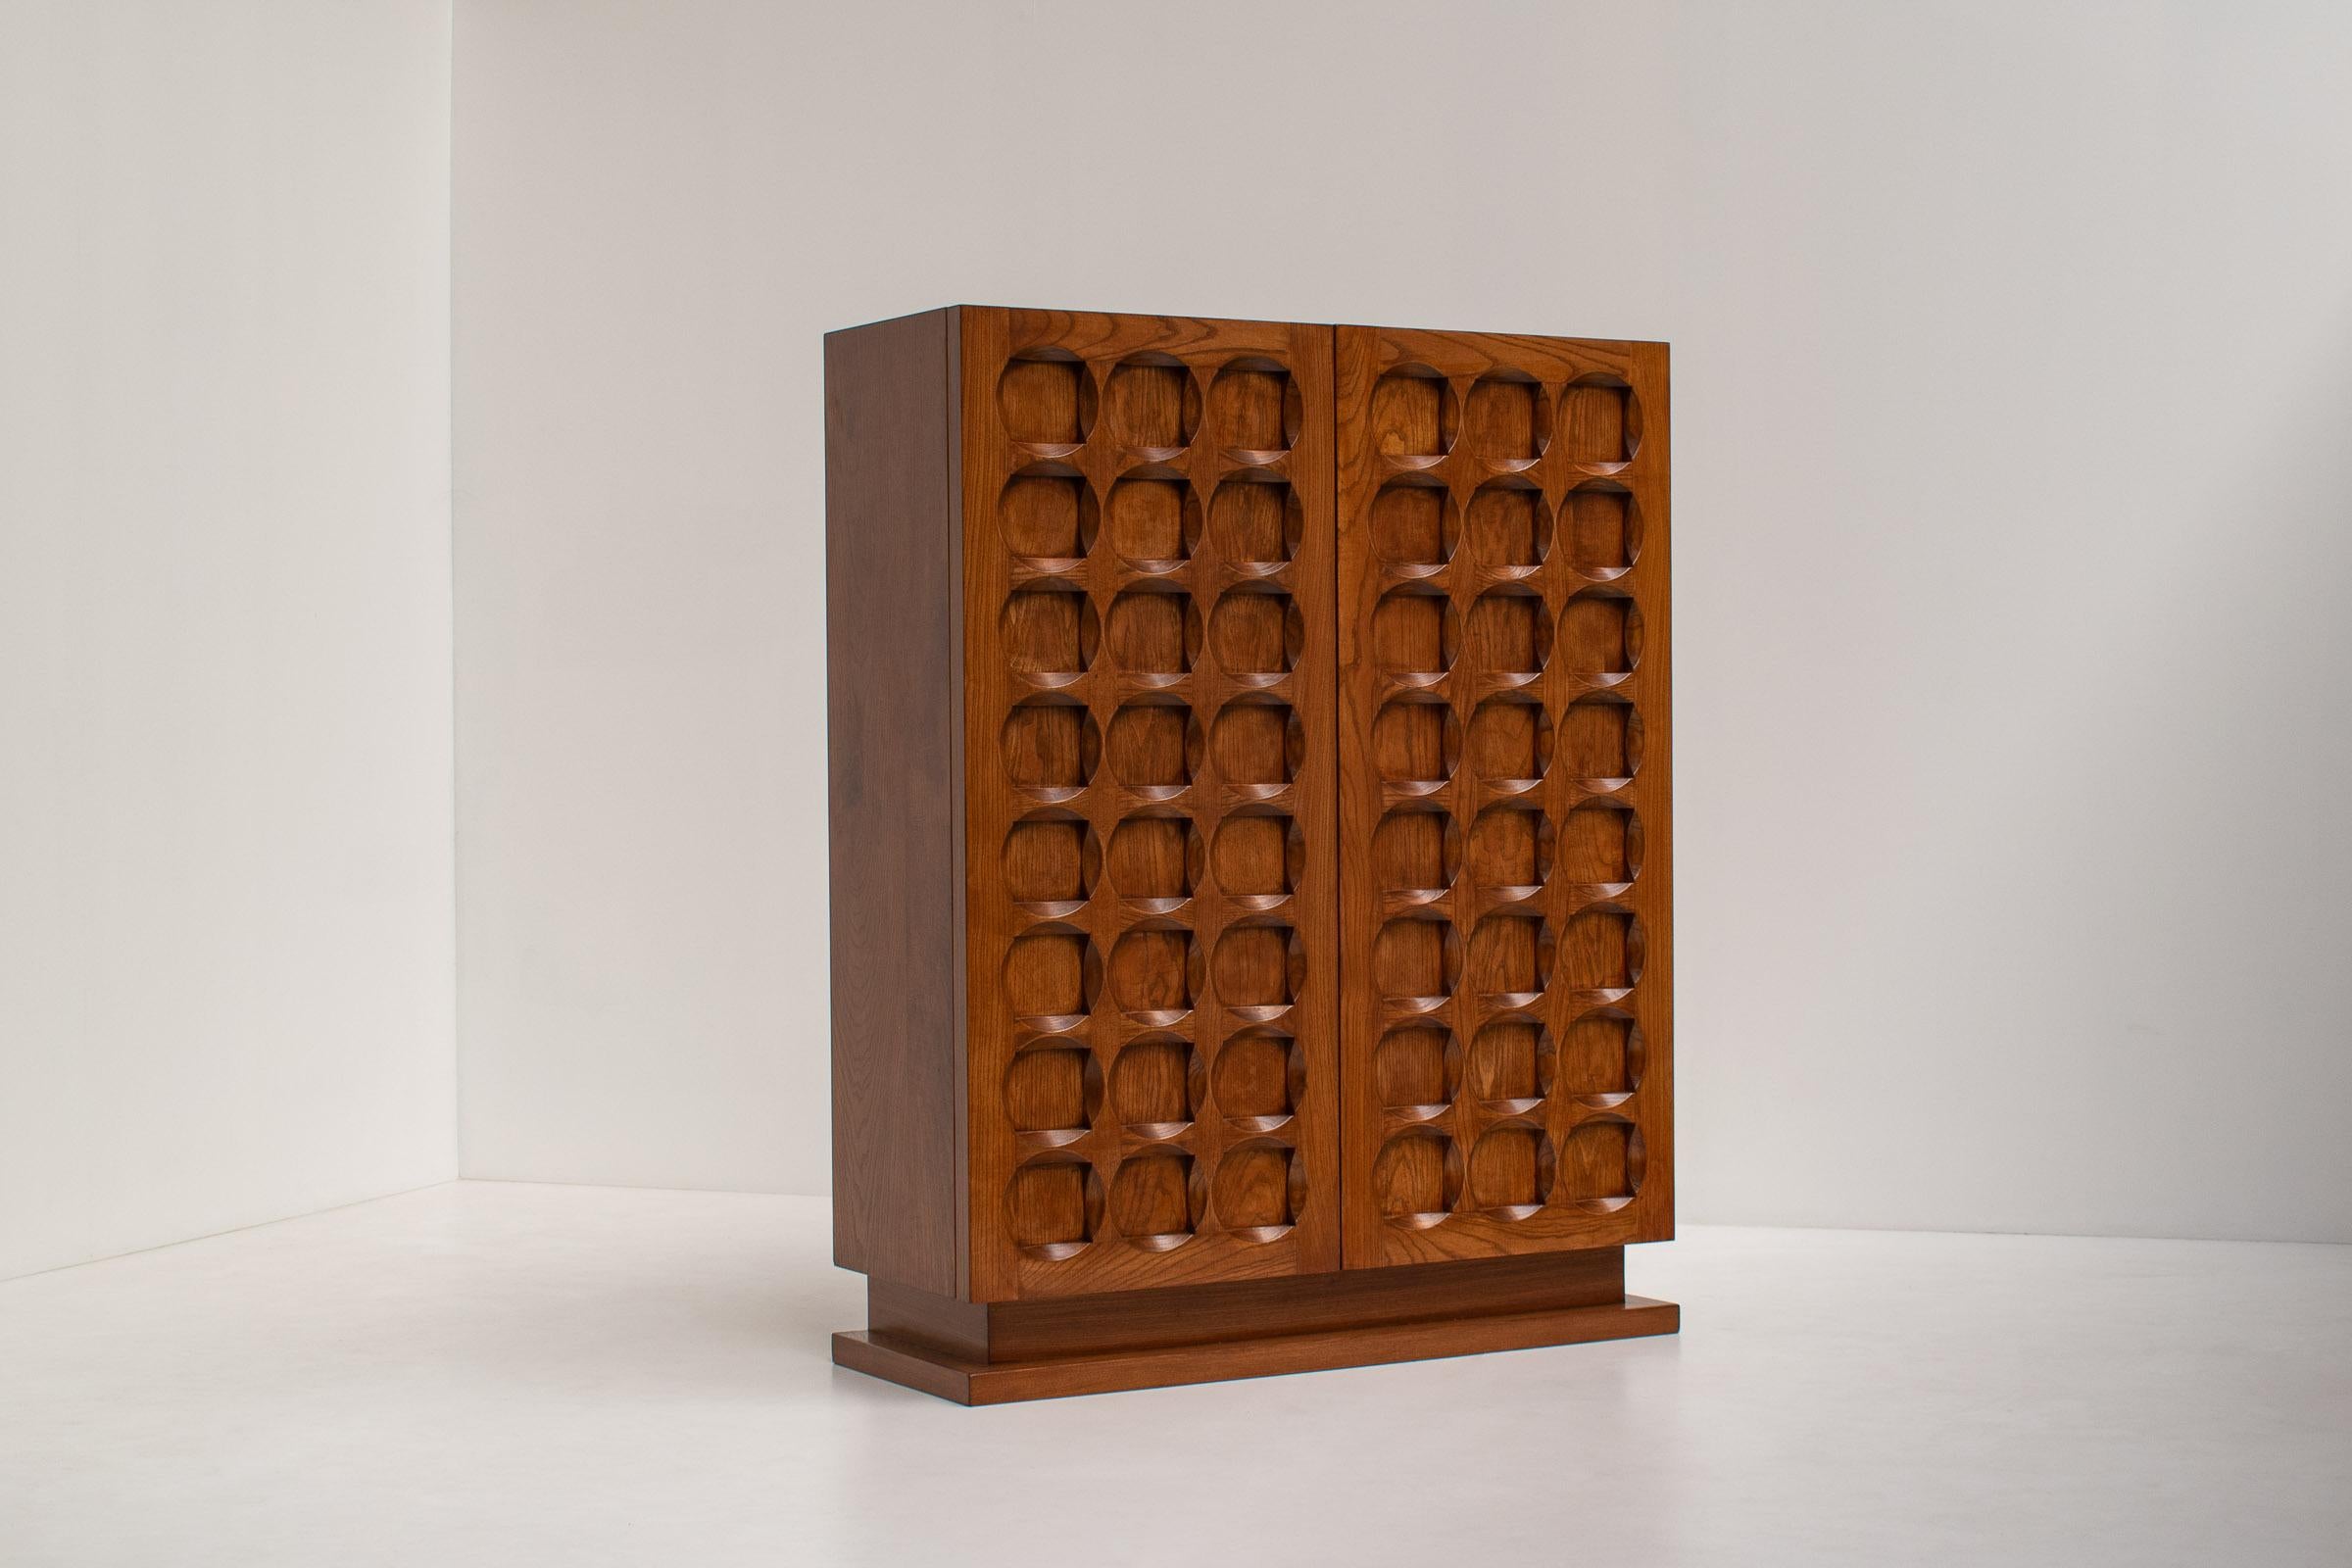 Stunning brutalist bar cabinet in blonde oak, Belgium, the 1970s.

If you're tired of all the black brutalist furniture, but you love the aesthetic of it, this cabinet is the ideal compromise. A timeless piece of brutalist craftmanship from the